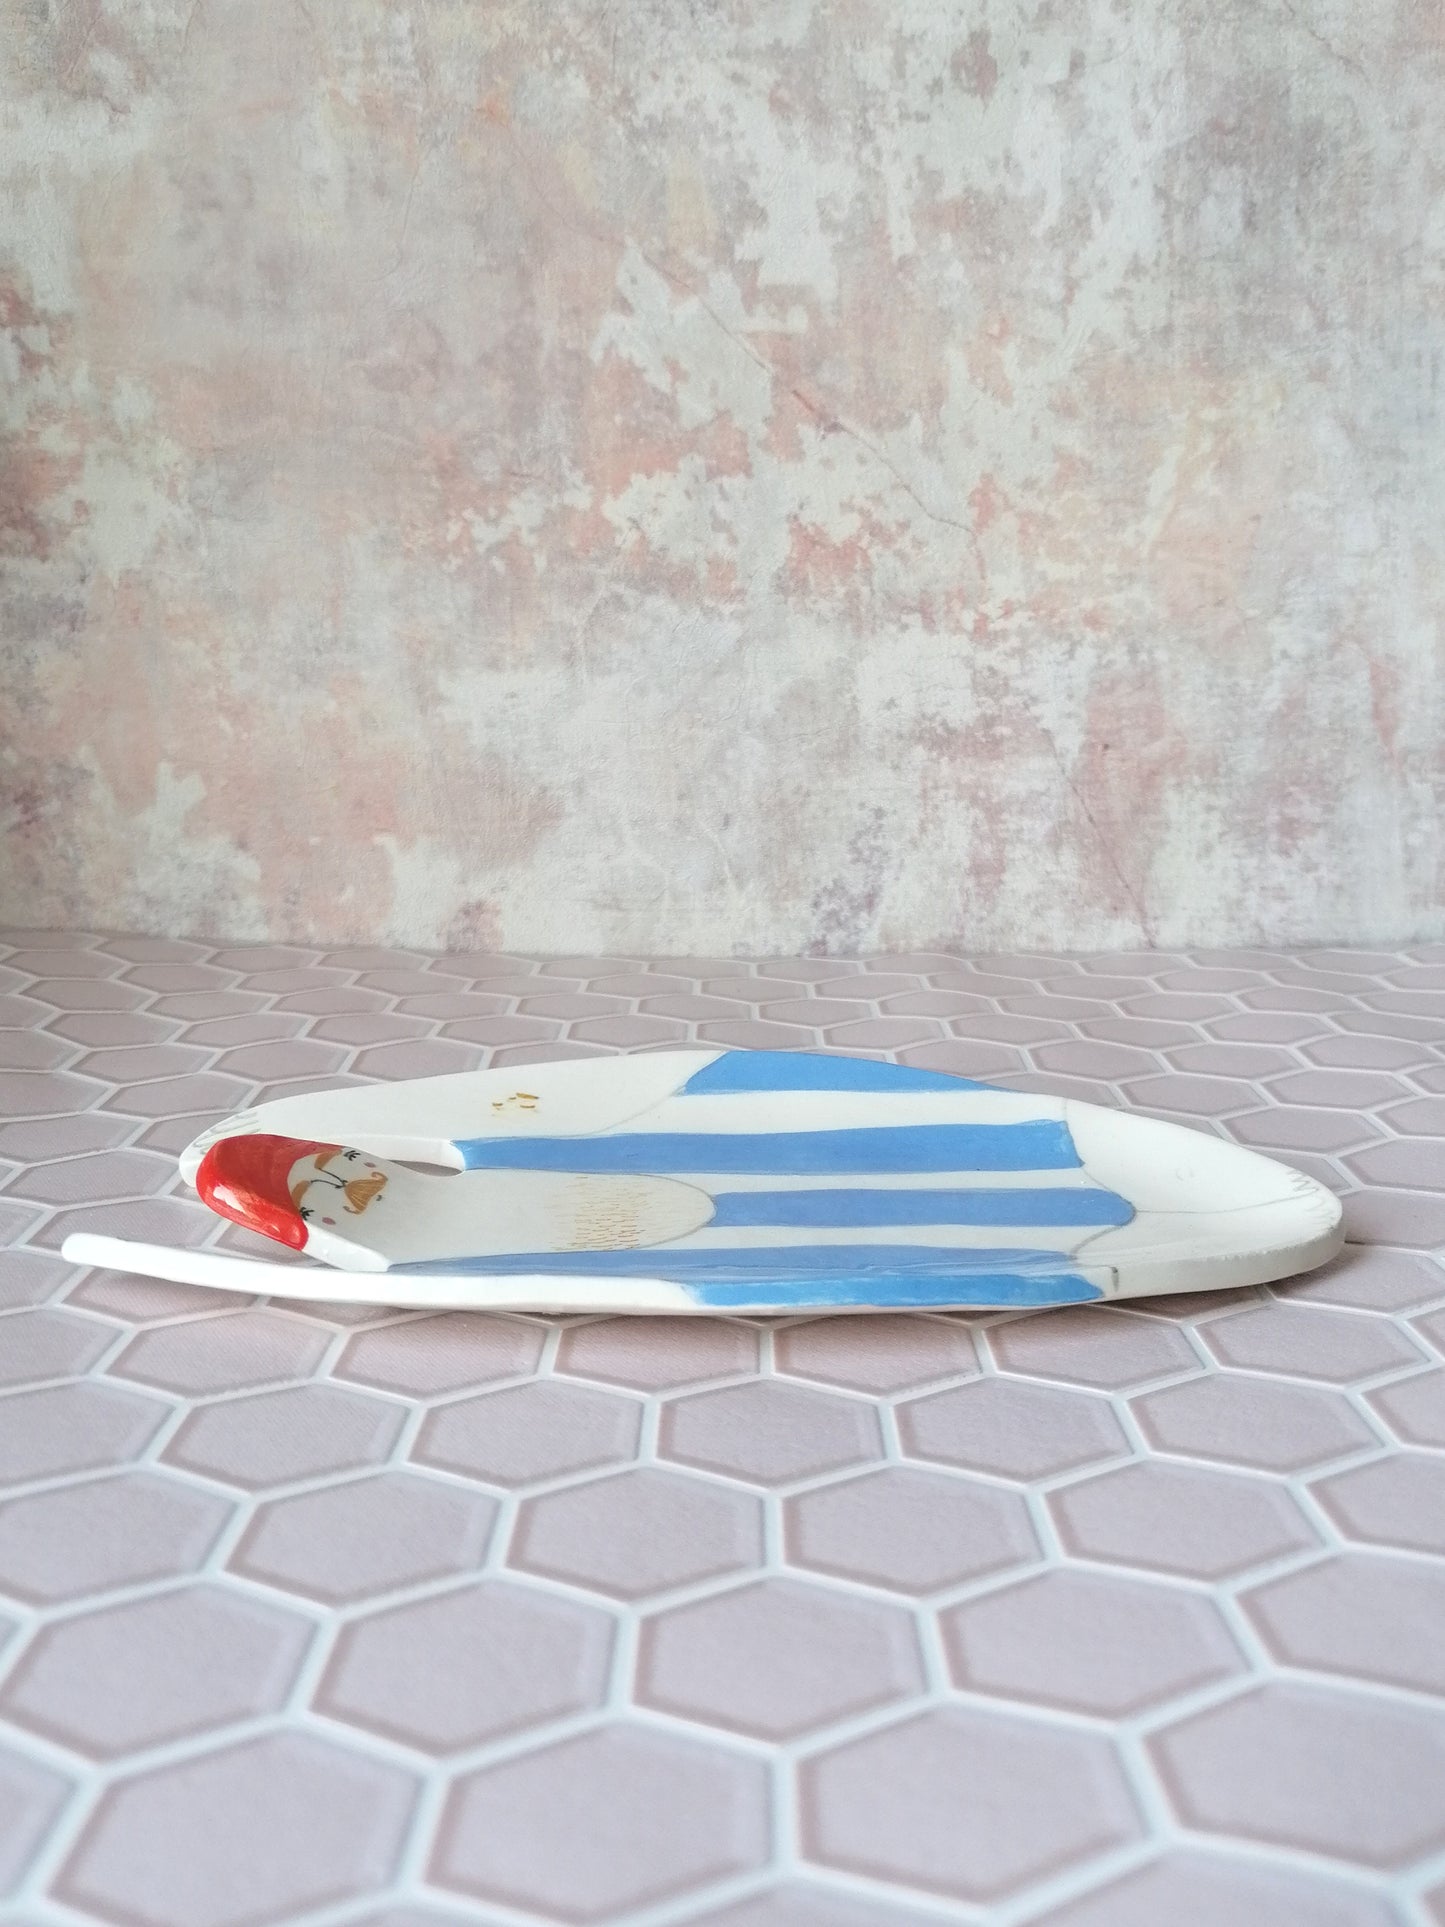 Made to order: Sid the swimmer handmade ceramic dish